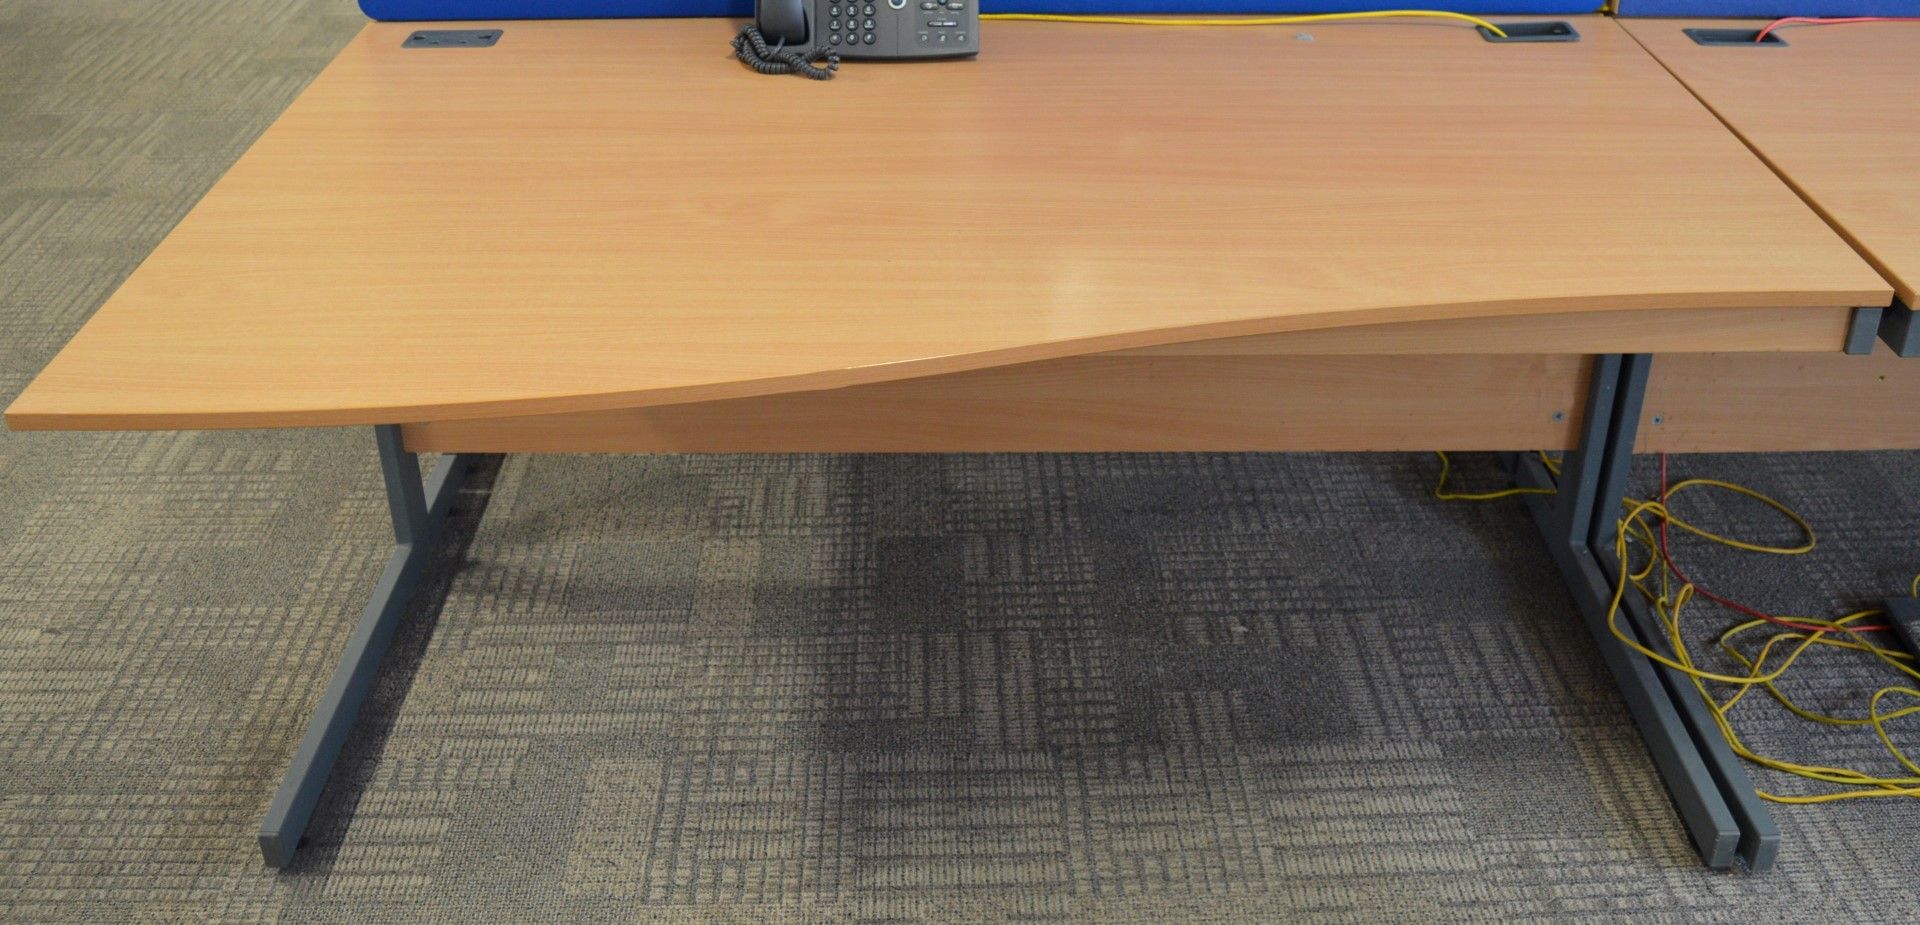 1 x Imperial Office Desk - Left Hand - Quality Beech Desk With Grey Coated Steel Frame - H71 x - Image 3 of 5